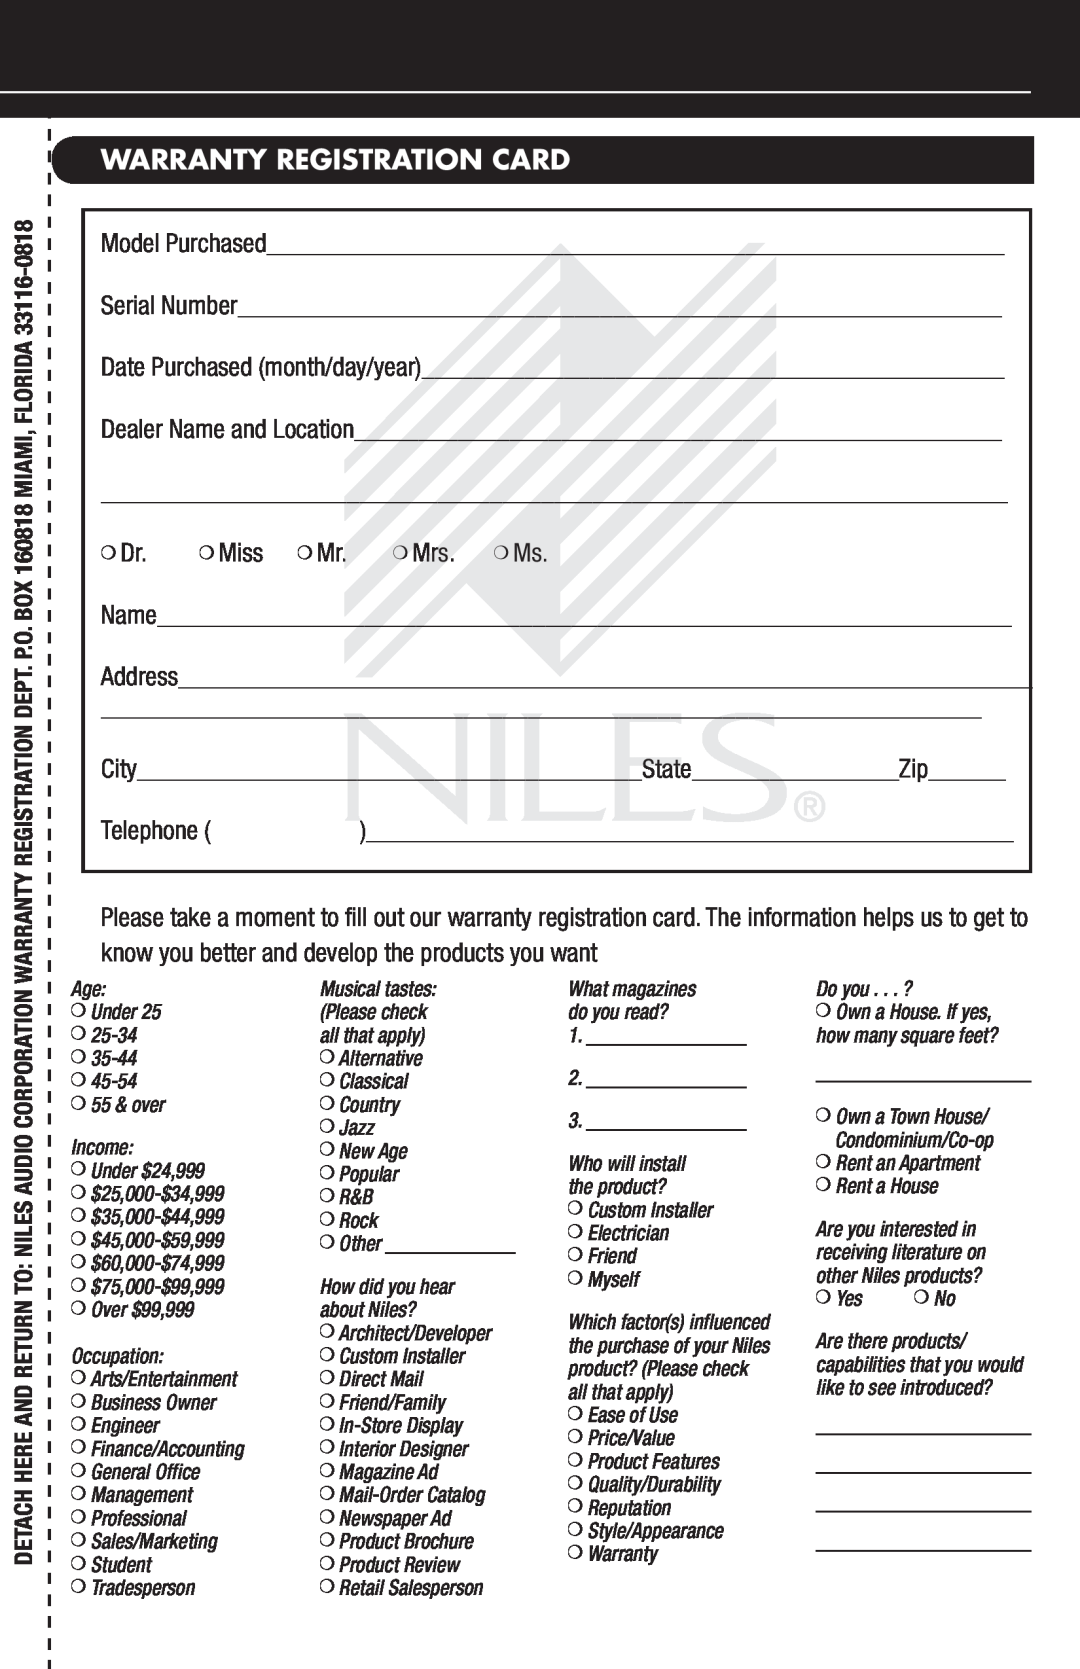 Niles Audio HDLCR Warranty Registration Card, Musical tastes, Under, Please check, 25-34, all that apply, 35-44, 45-54 